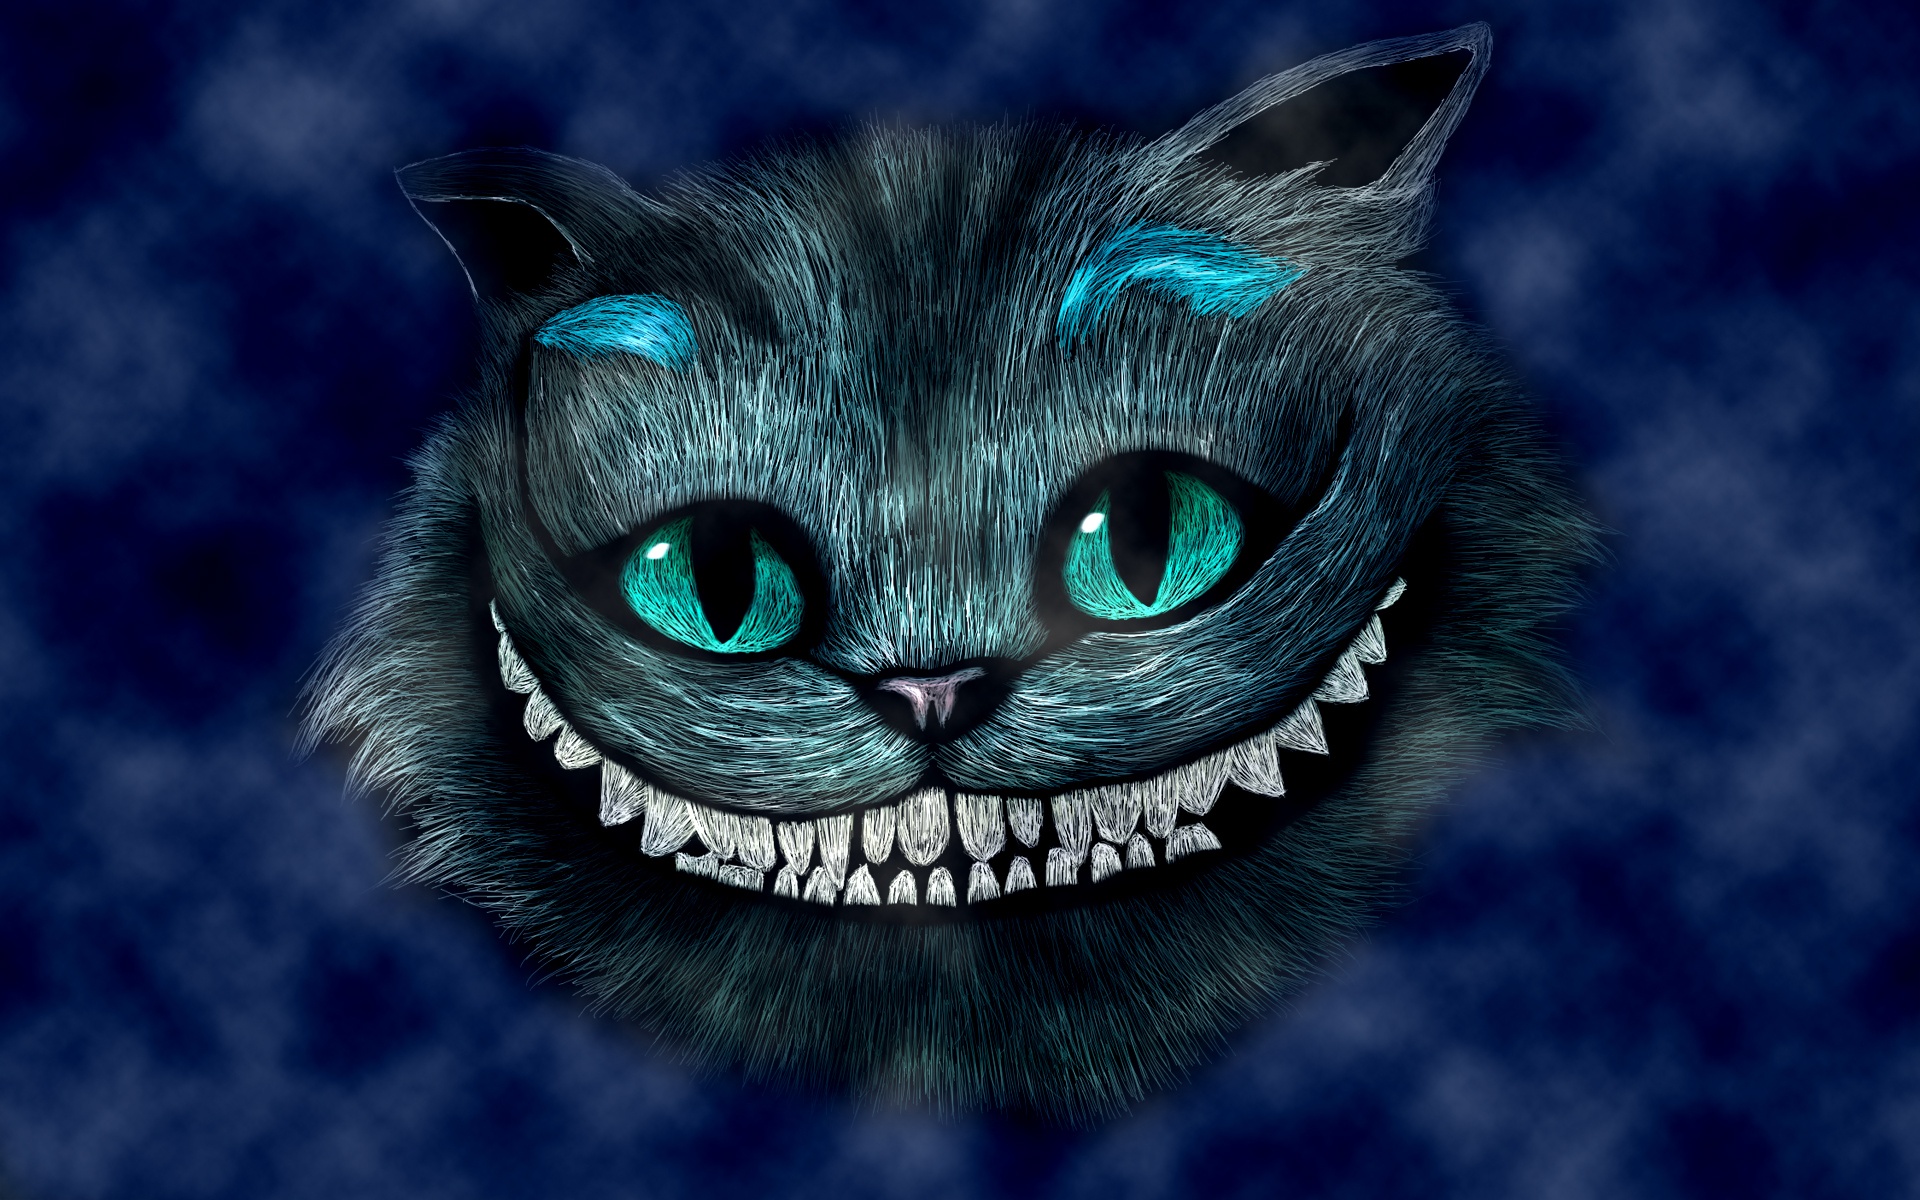 Wallpaper Alice In Wonderland, Smiling Cheshire Cat - Alice In Wonderland Chester Cat , HD Wallpaper & Backgrounds